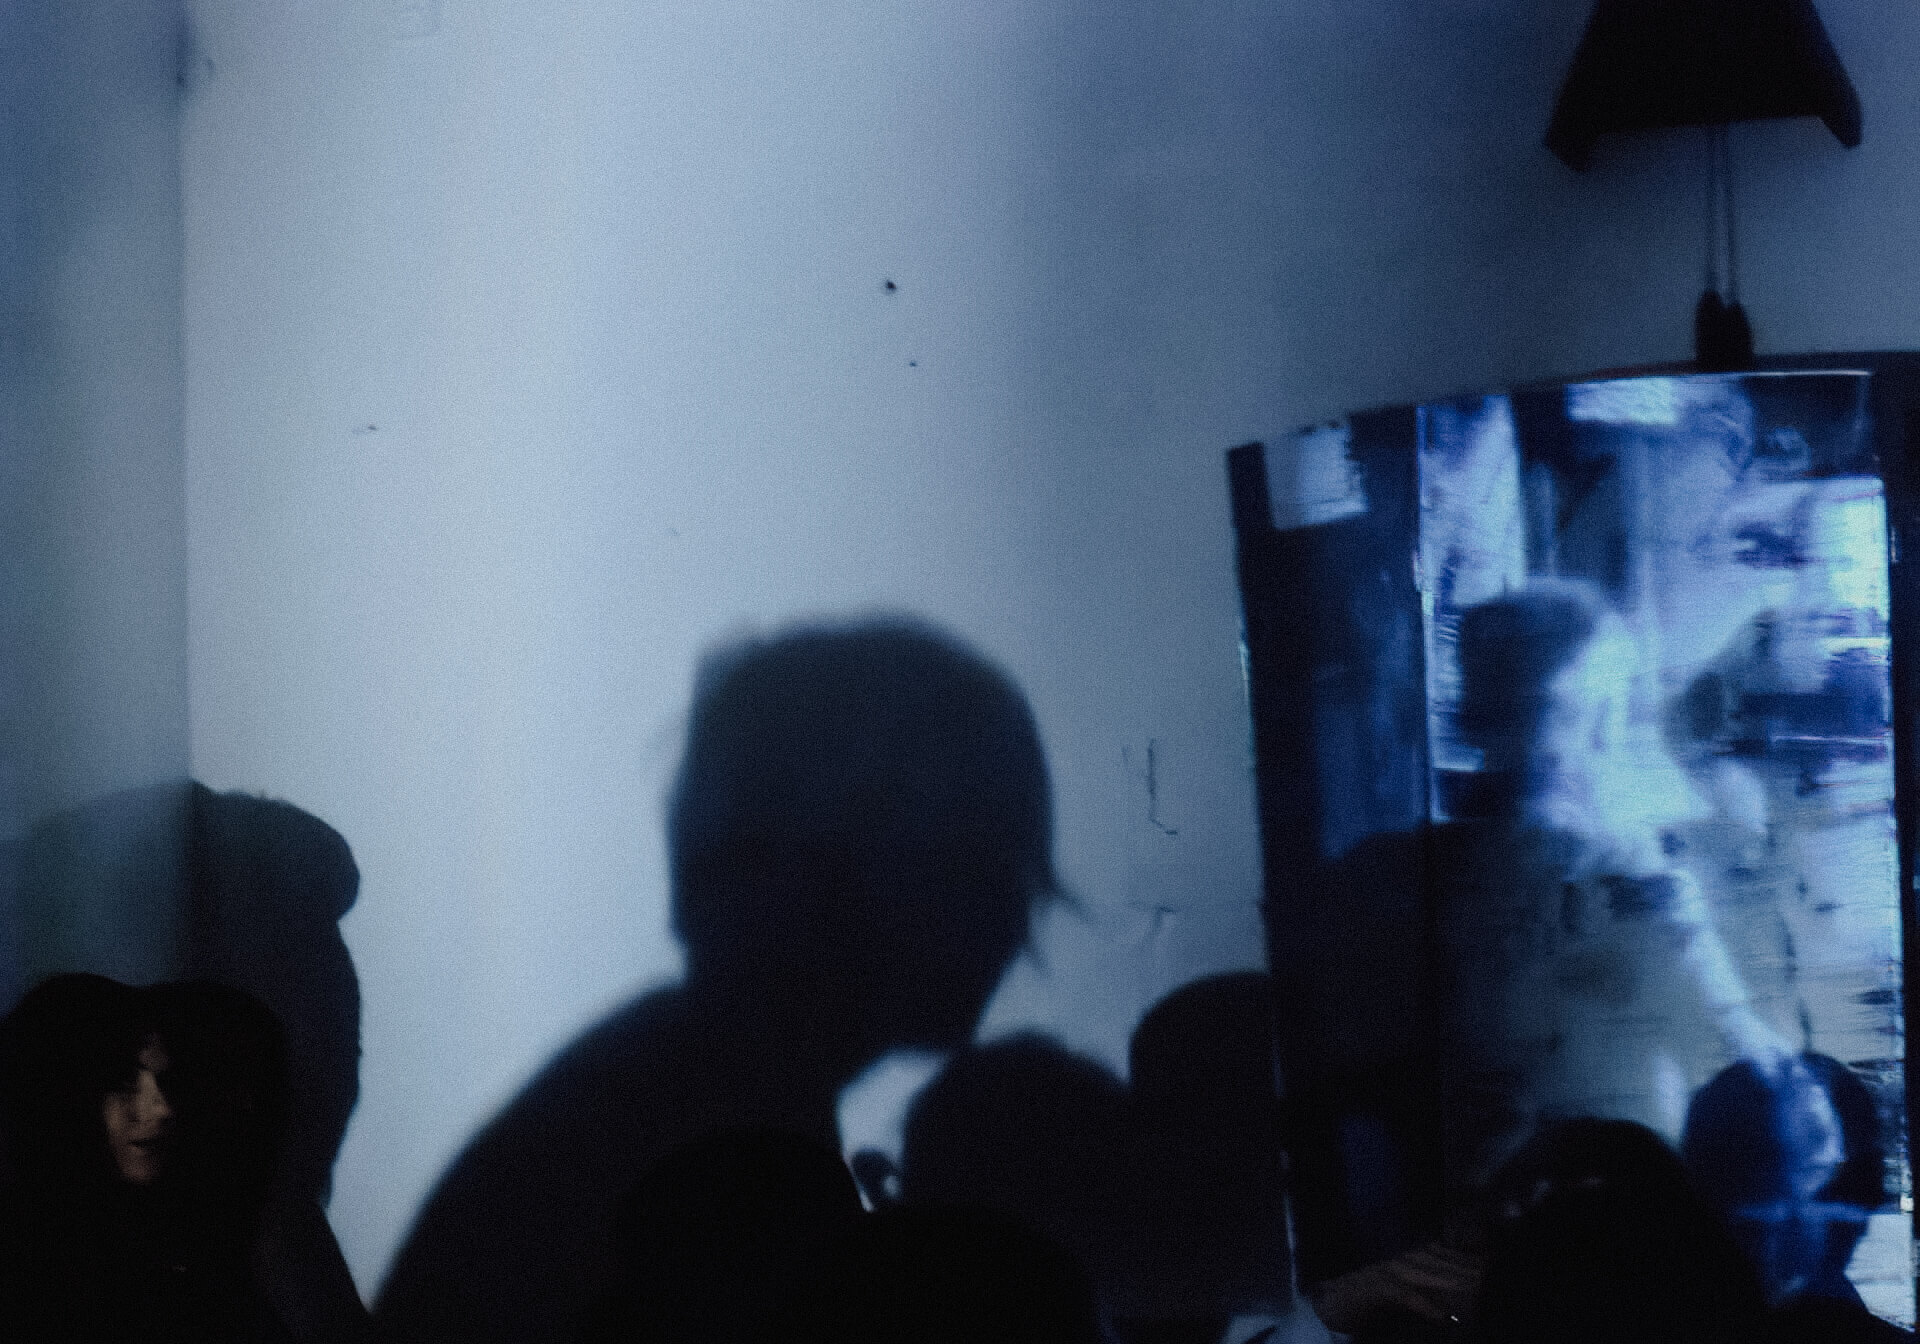 In a dark room slightly hinted with blue lighting. On the right hand side, there is a metal board shaped as like a closet. On the left, there is a shadow of a person